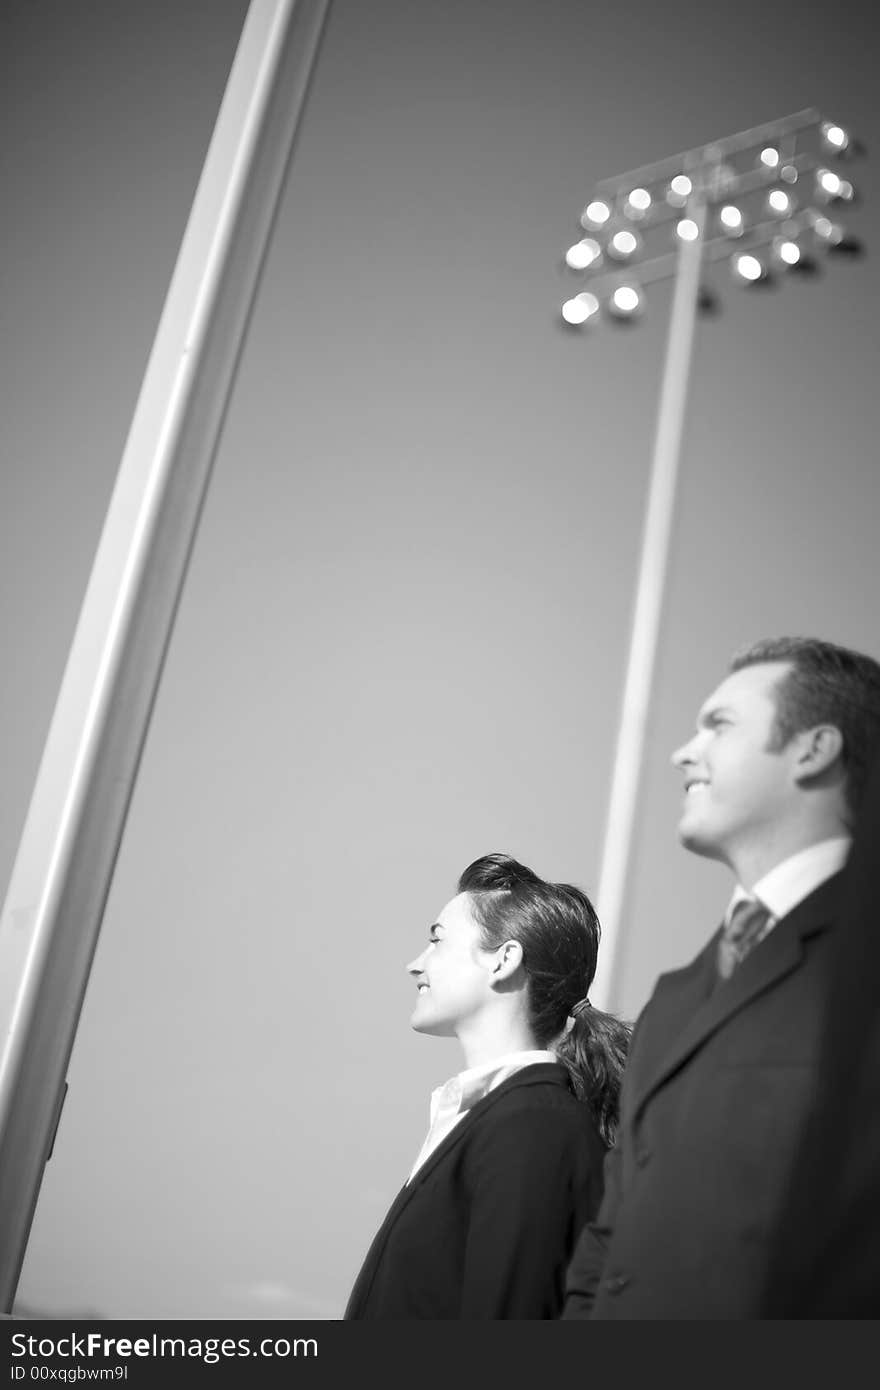 Profile view of businessman and businesswoman standing in formal wear in front of large lights. Profile view of businessman and businesswoman standing in formal wear in front of large lights